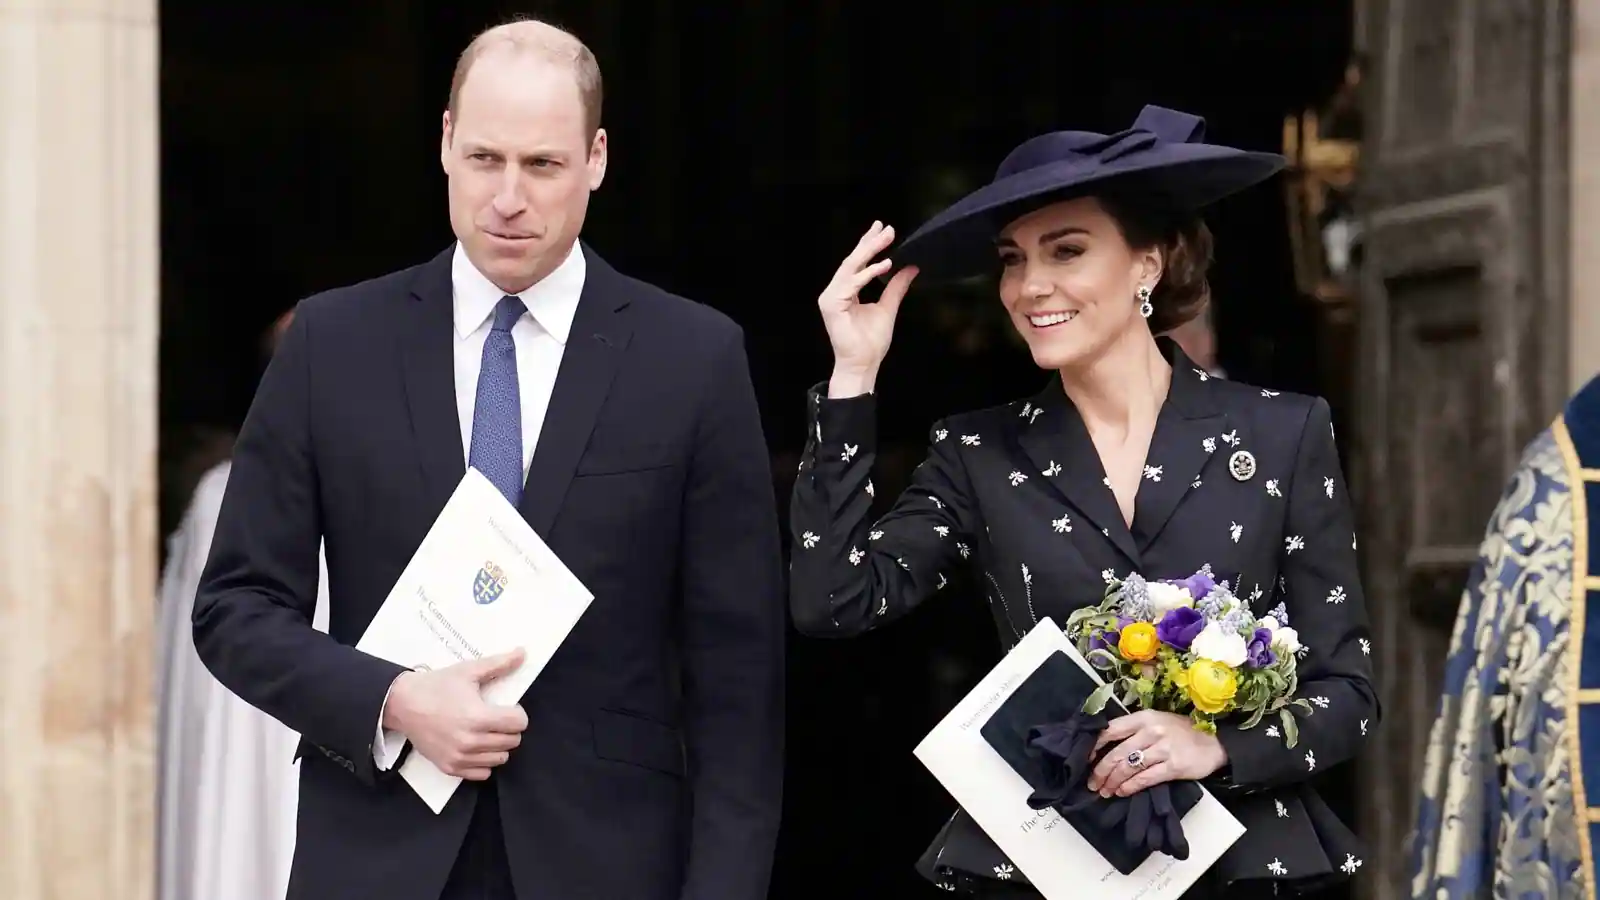 Kate Middleton Keen to Attend This Royal Event Despite Prince William's Resistance